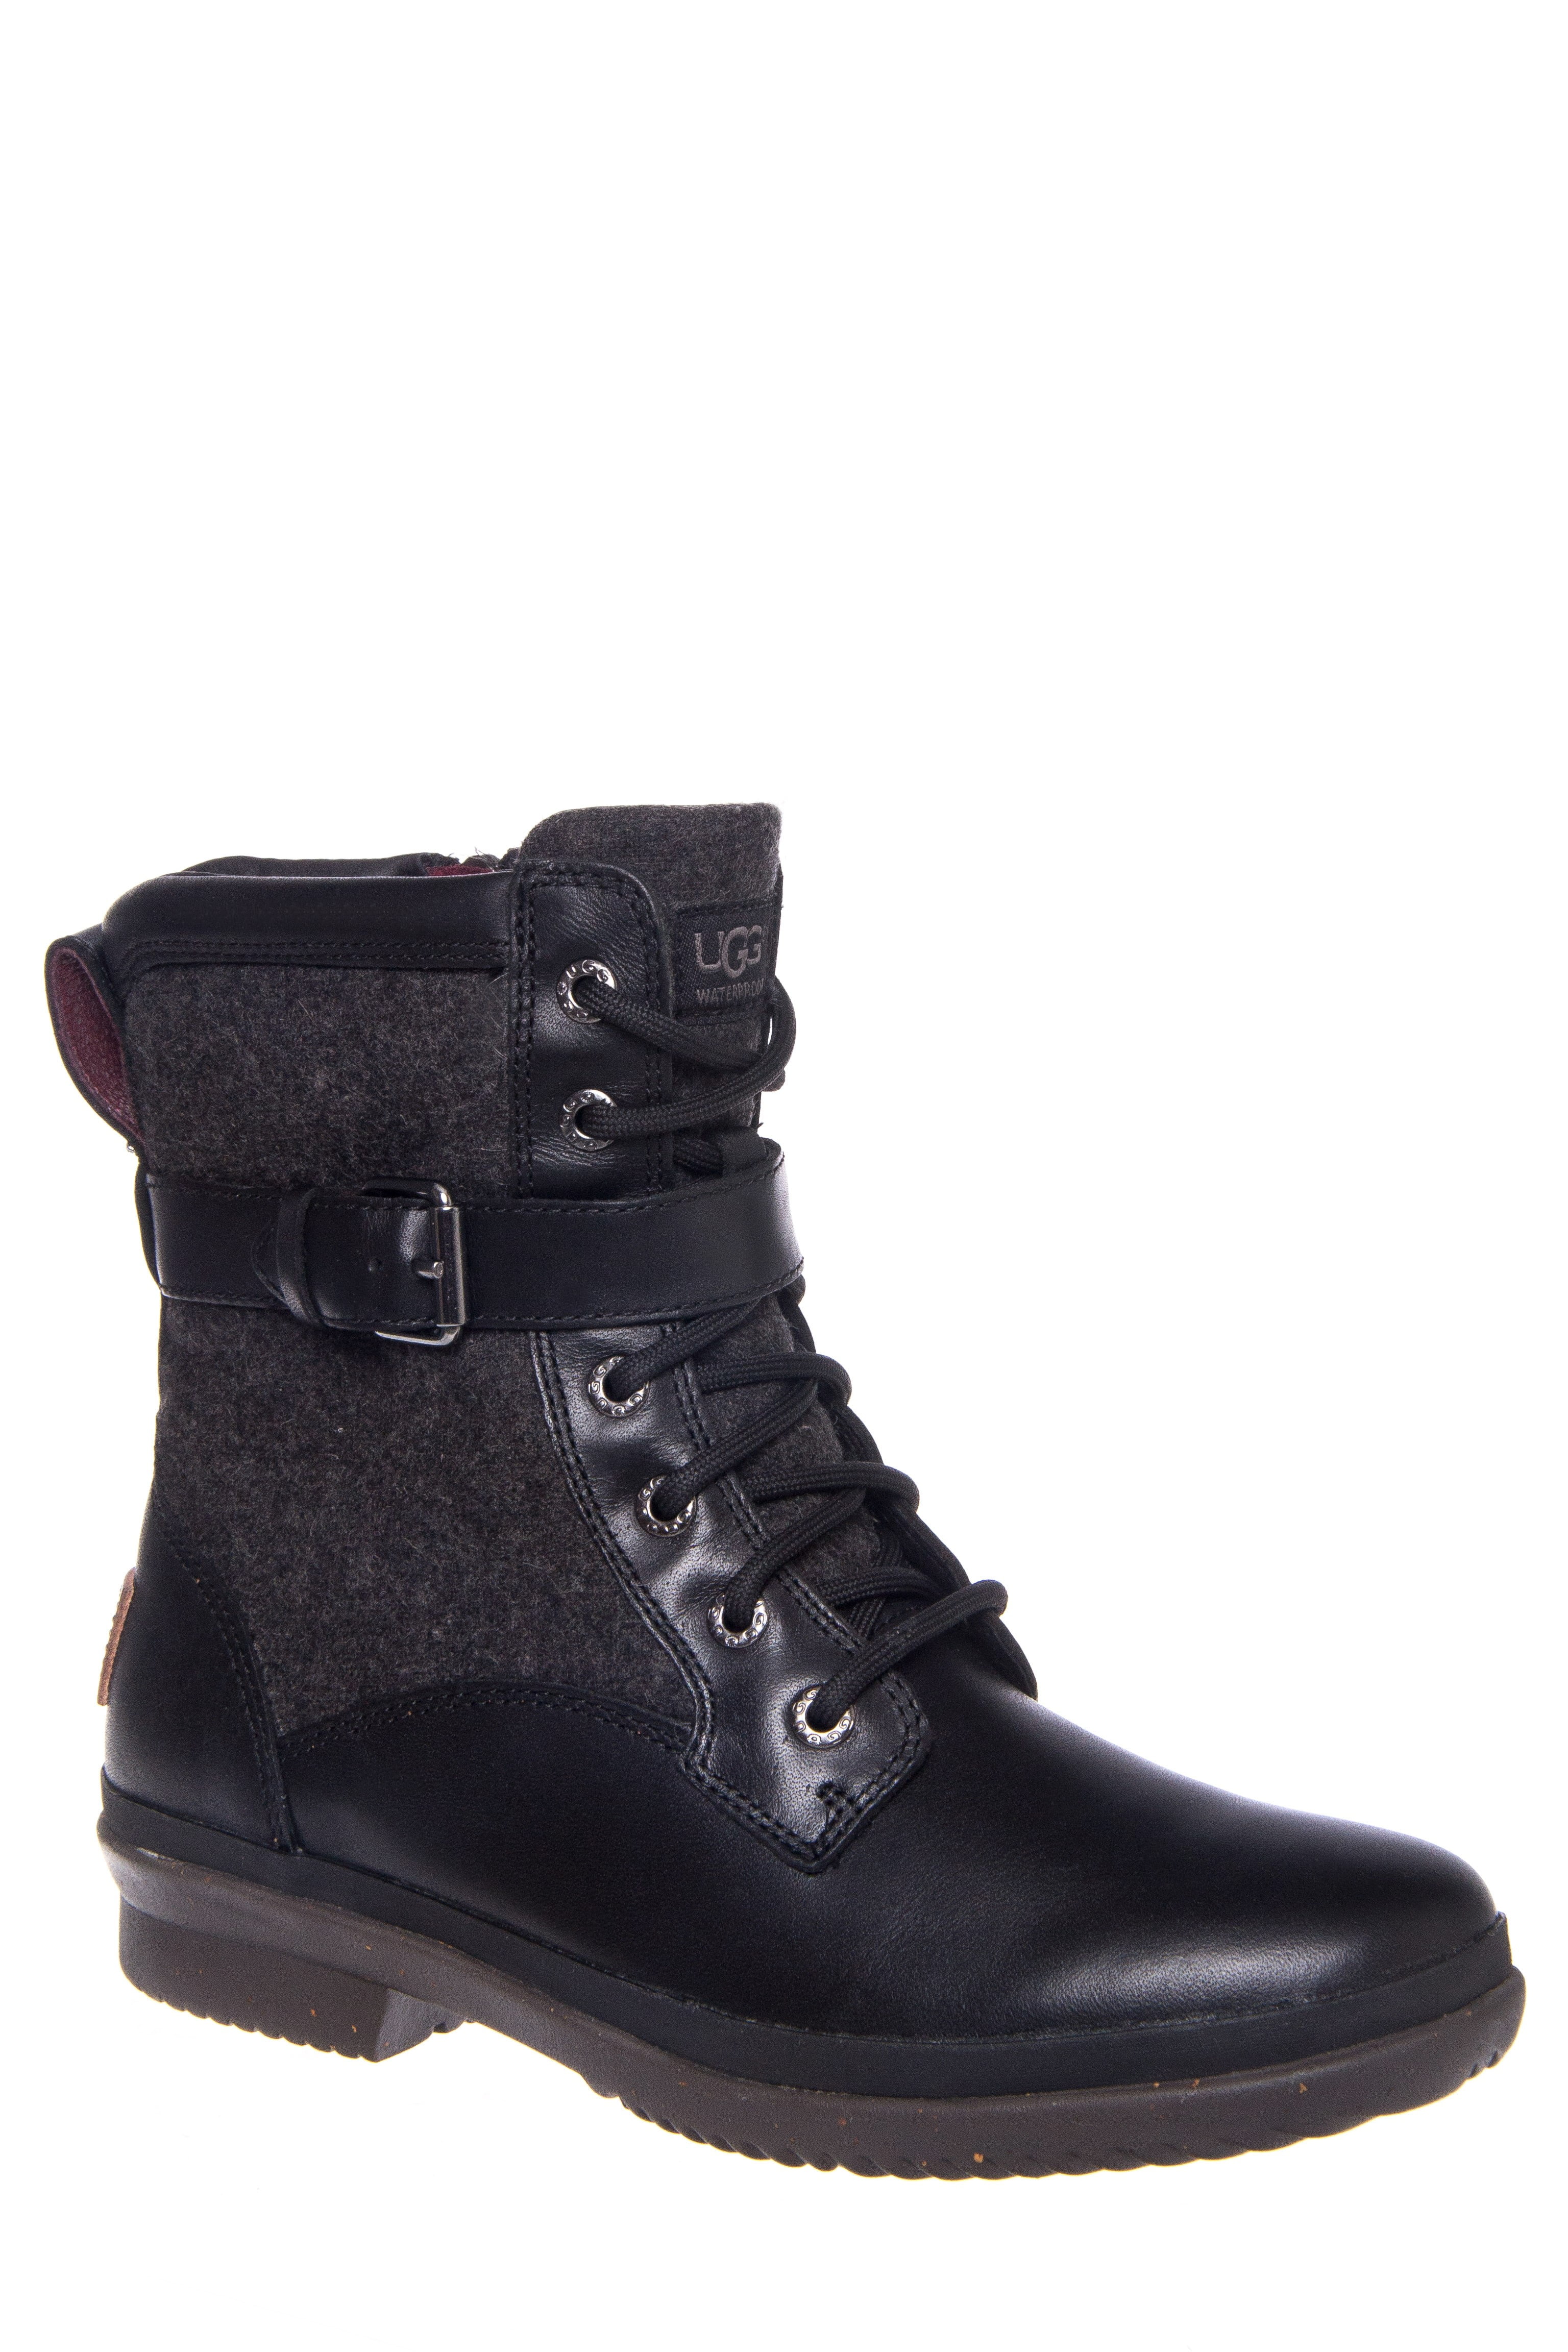 ugg women's kesey boots black